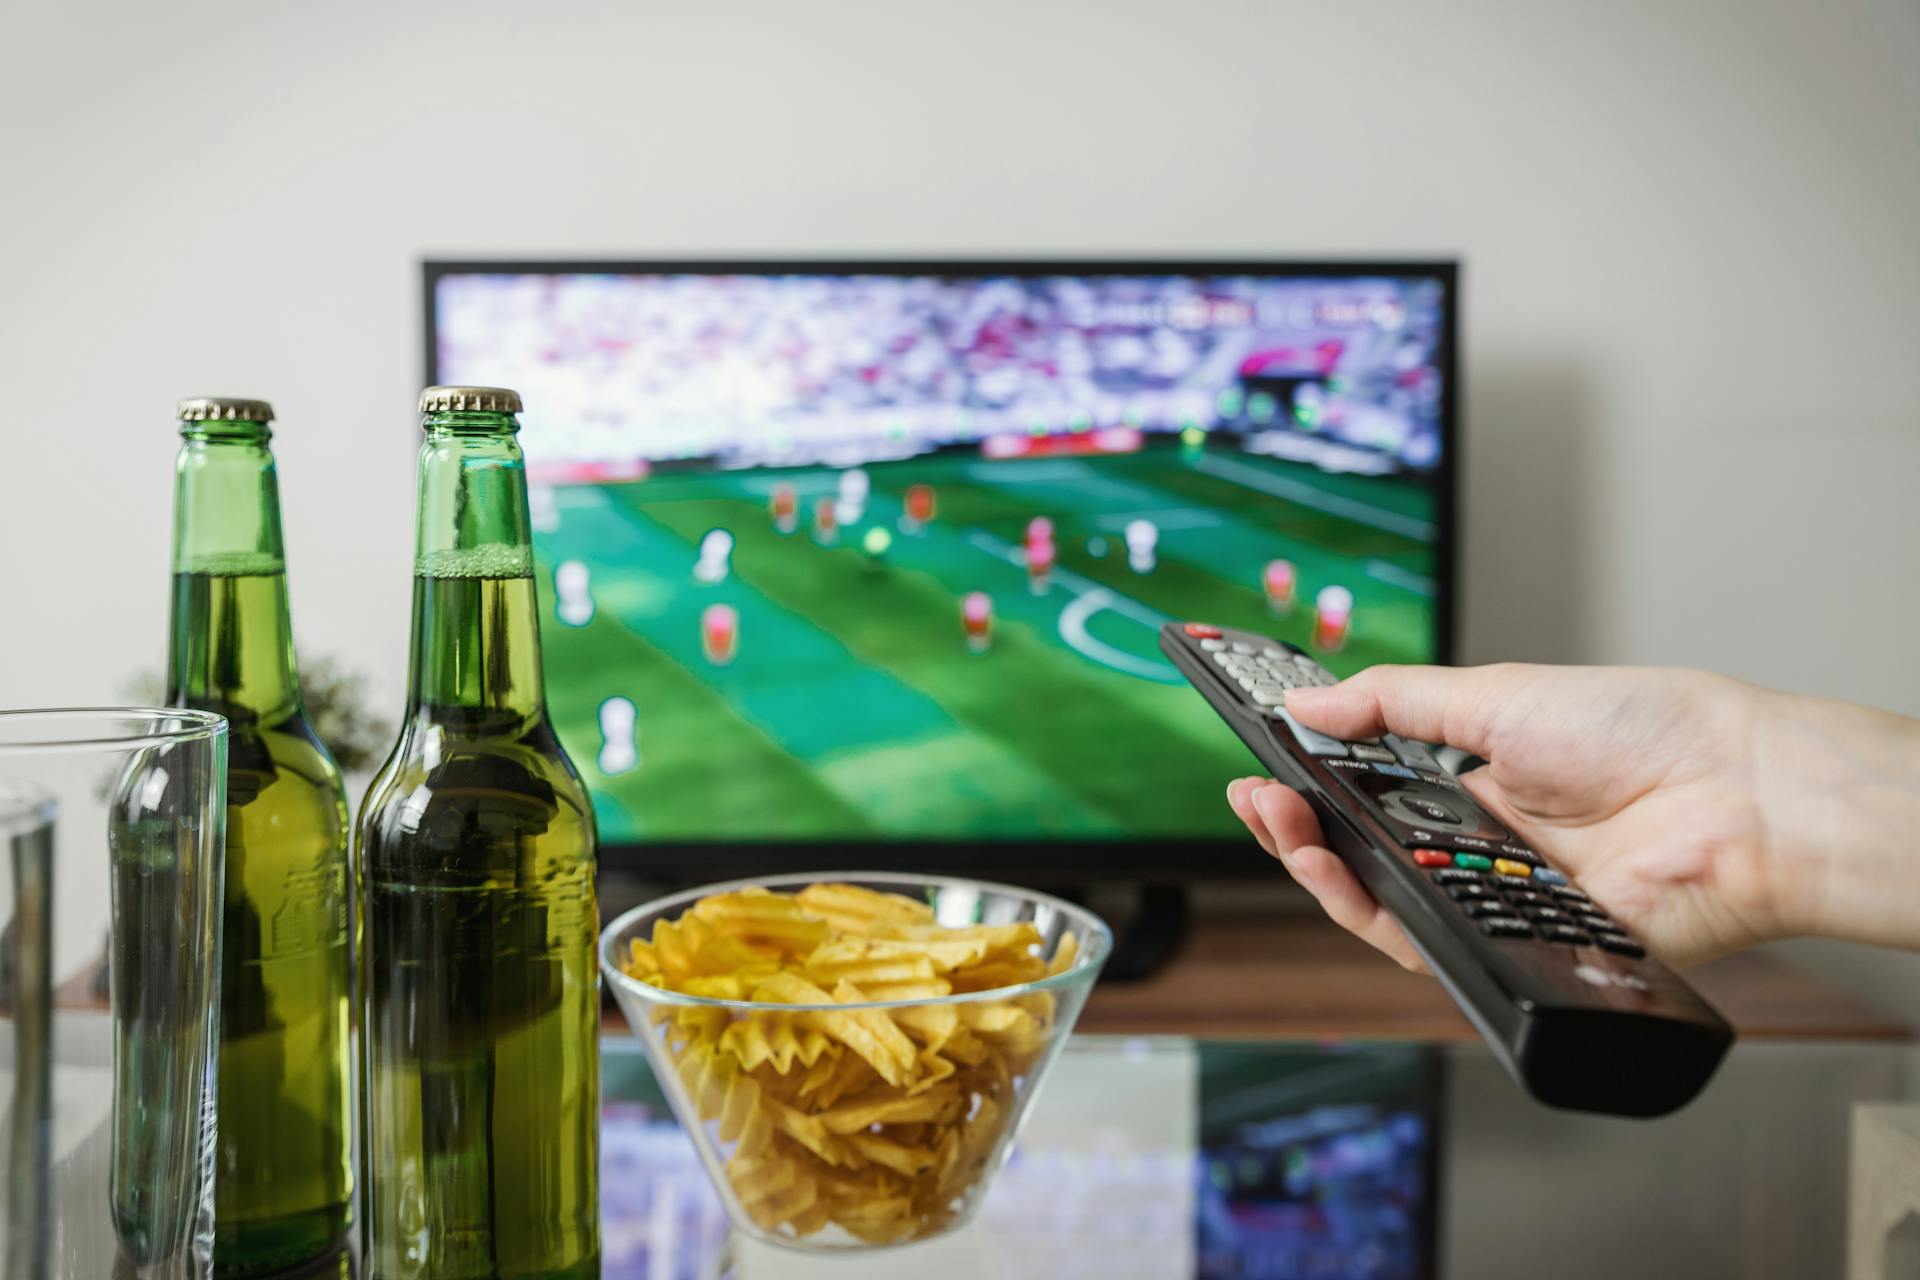 A person watching football | Source: Pexels